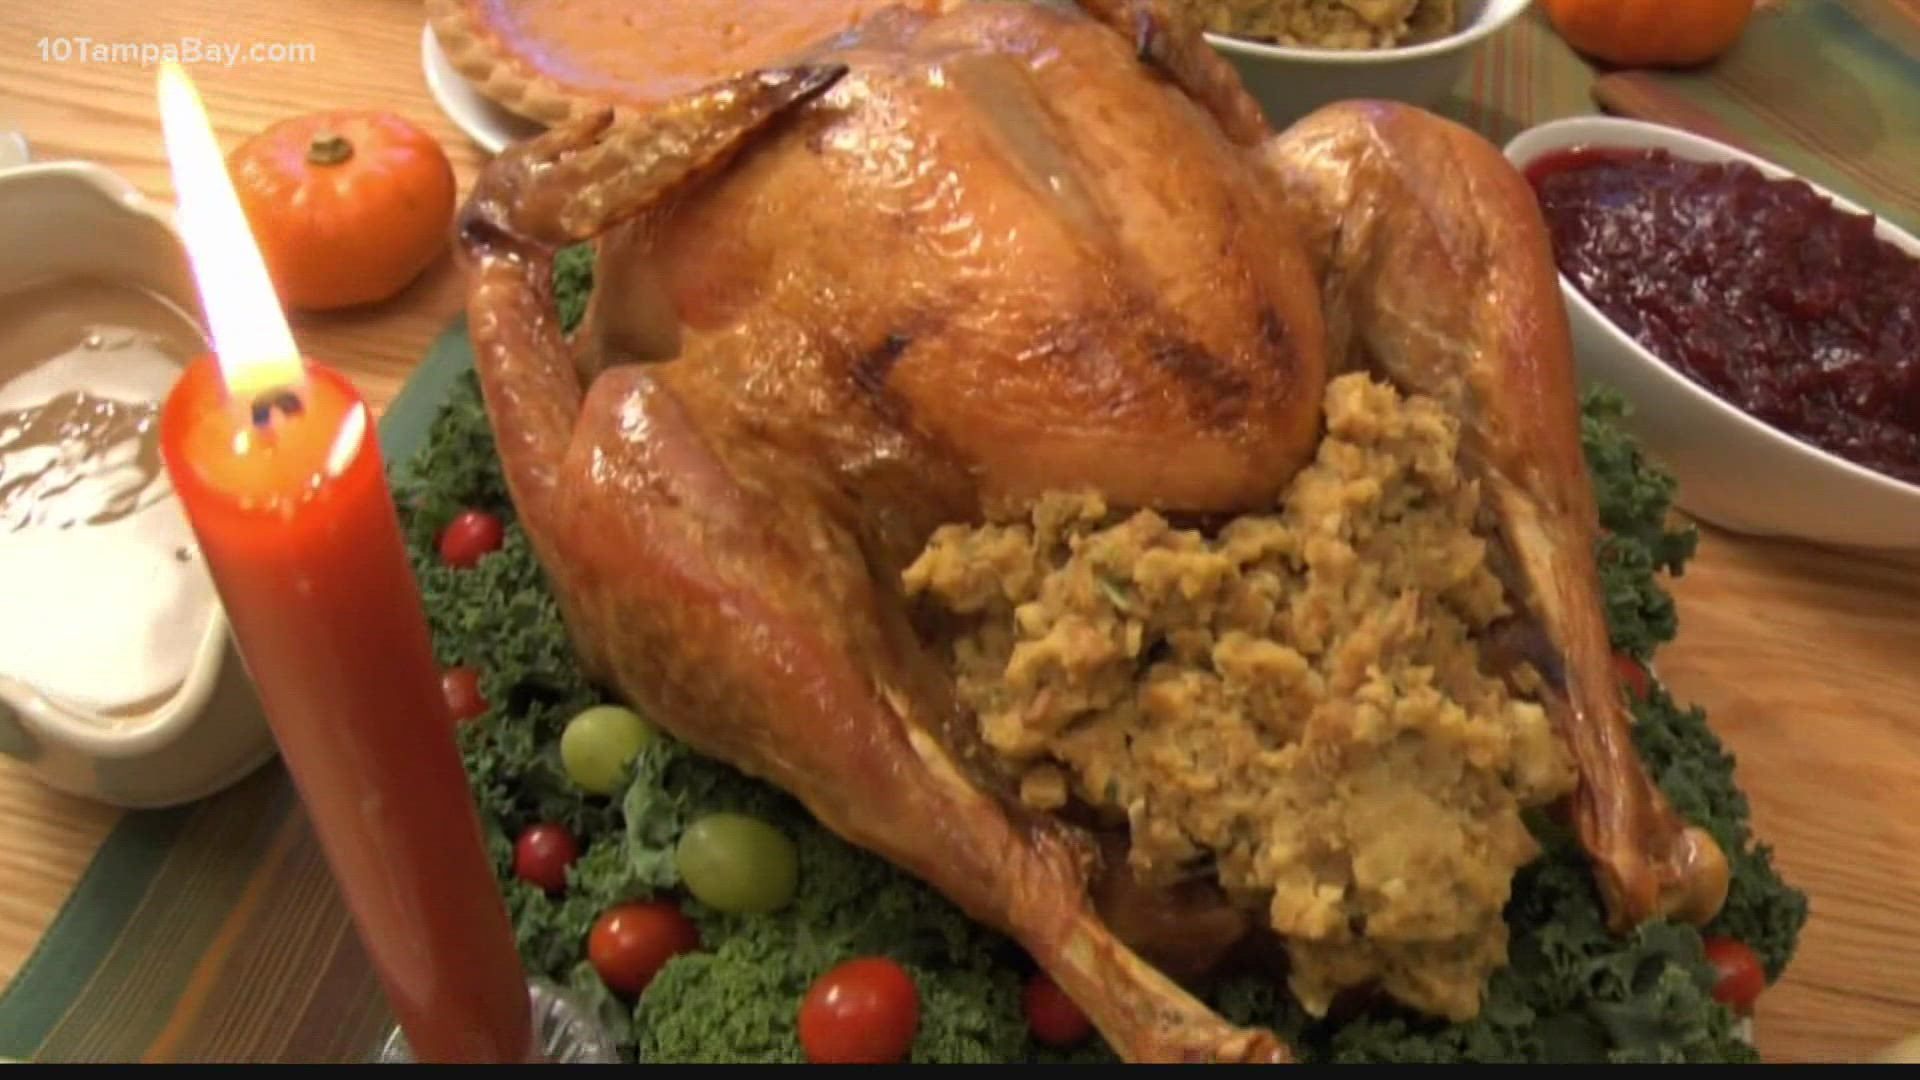 As you prep your Thanksgiving feast, we've got you covered with some helpful tips from a chef.